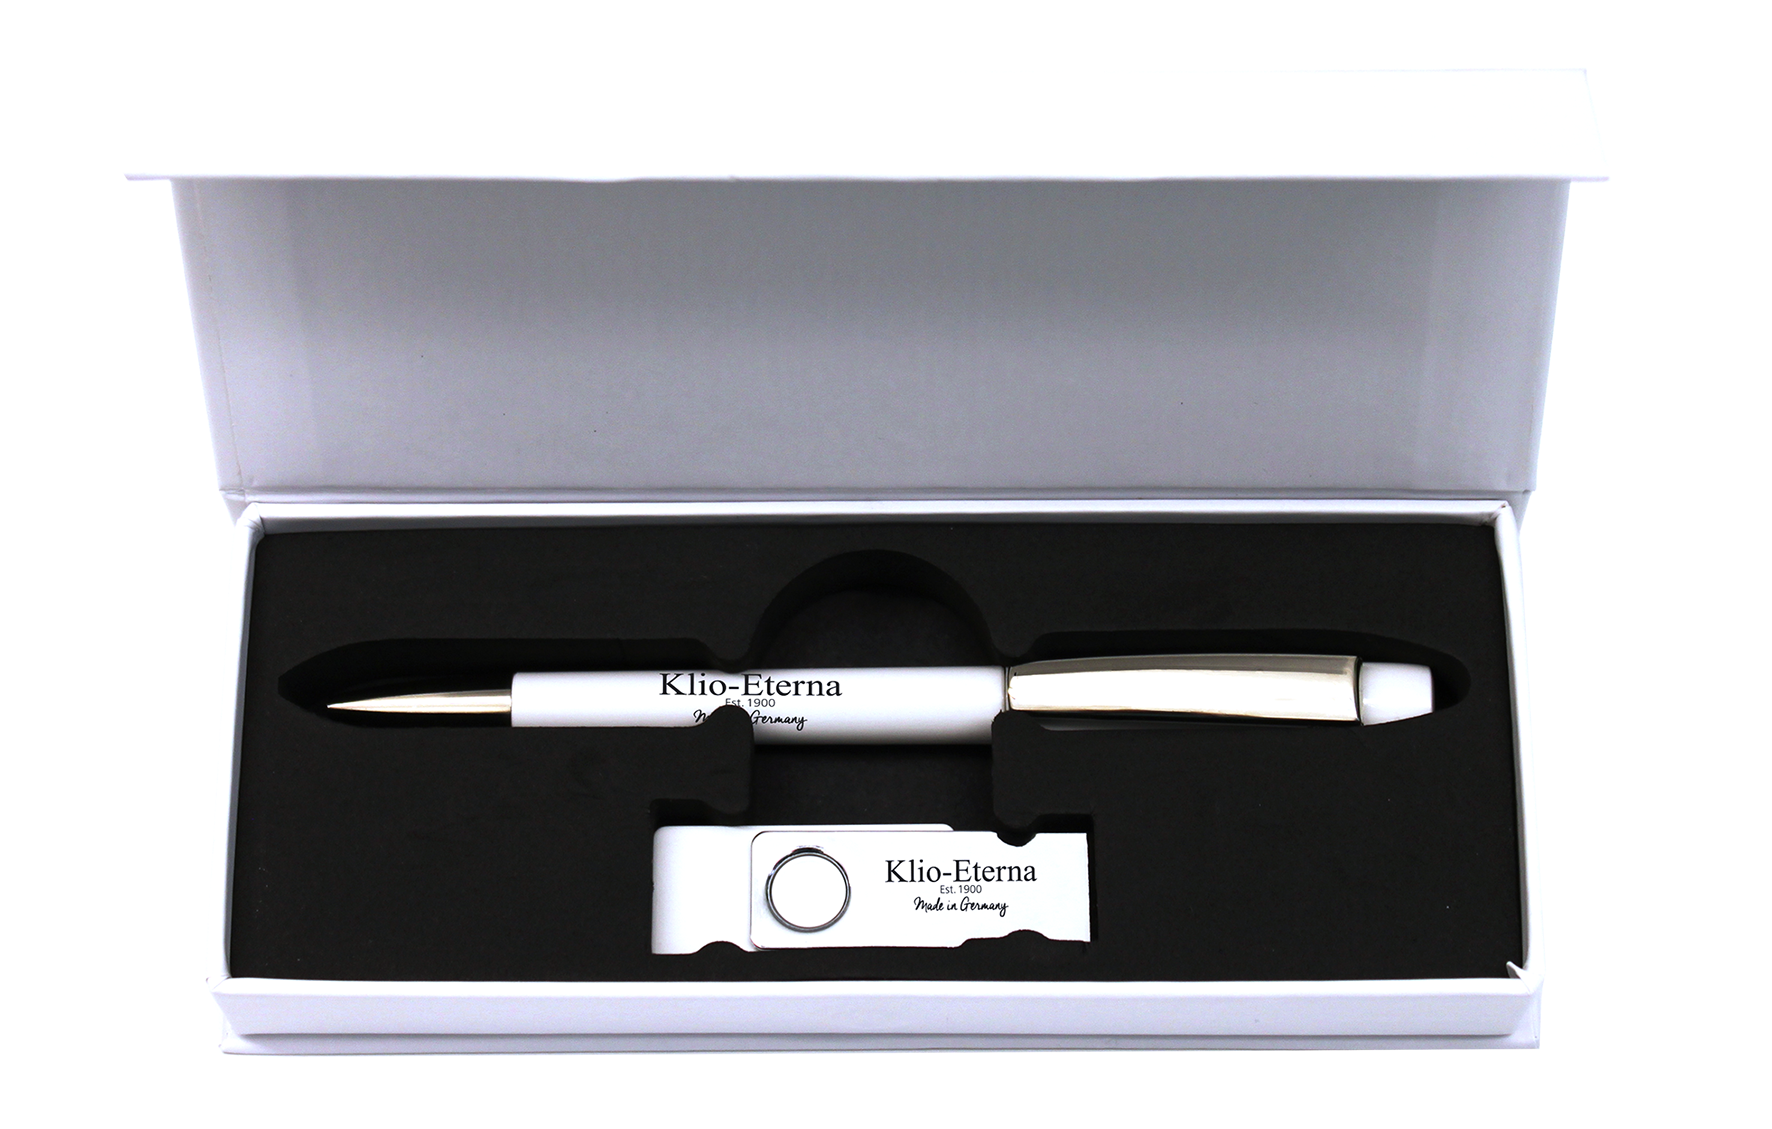 End of year gift set: elegant pen and USB stick by Klio Eterna